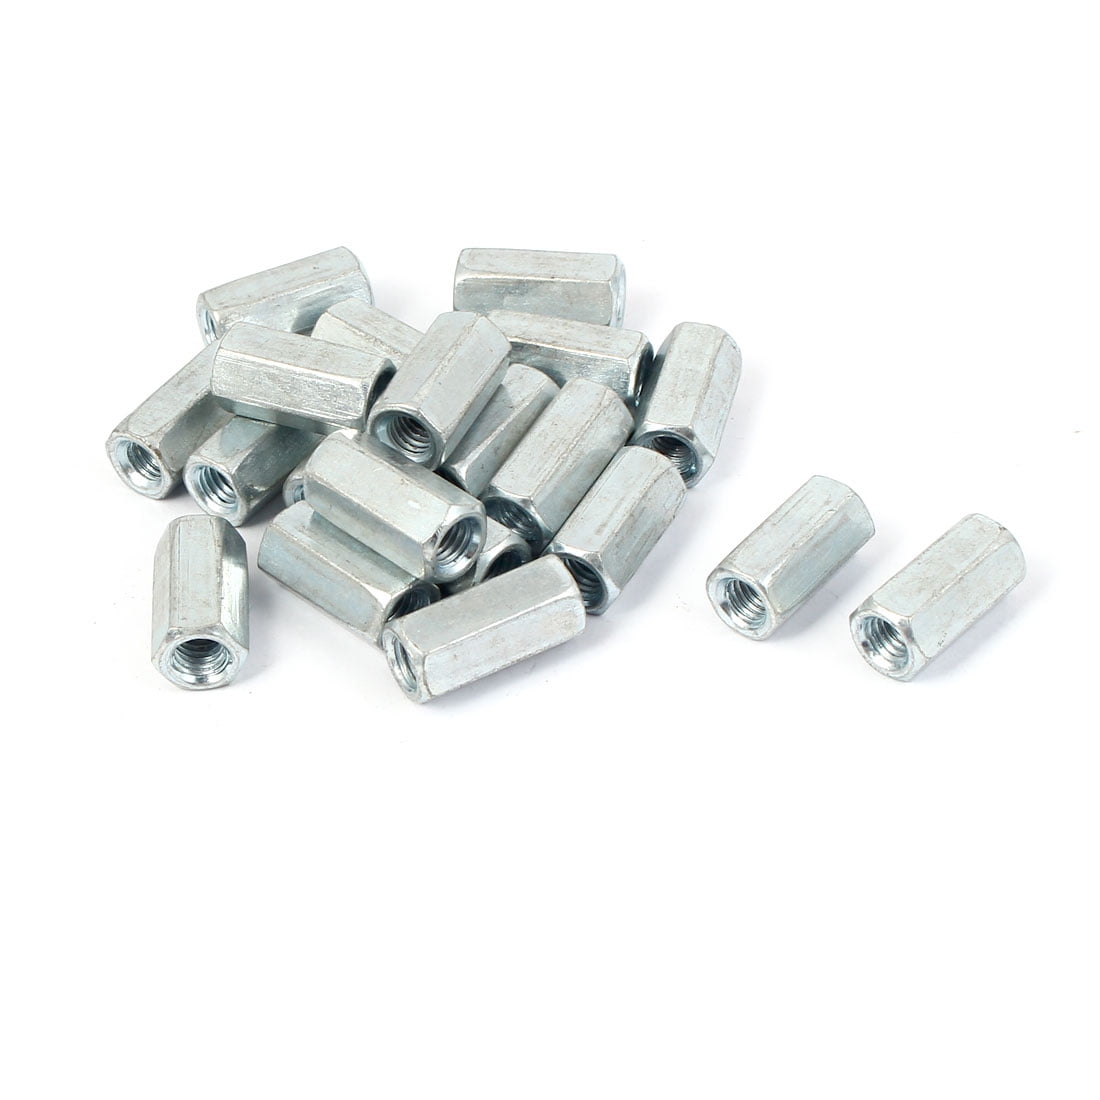 Zinc Plated Threaded Sleeve Rod Bar Stud Round Connector Long Nuts M6,8,10,12 